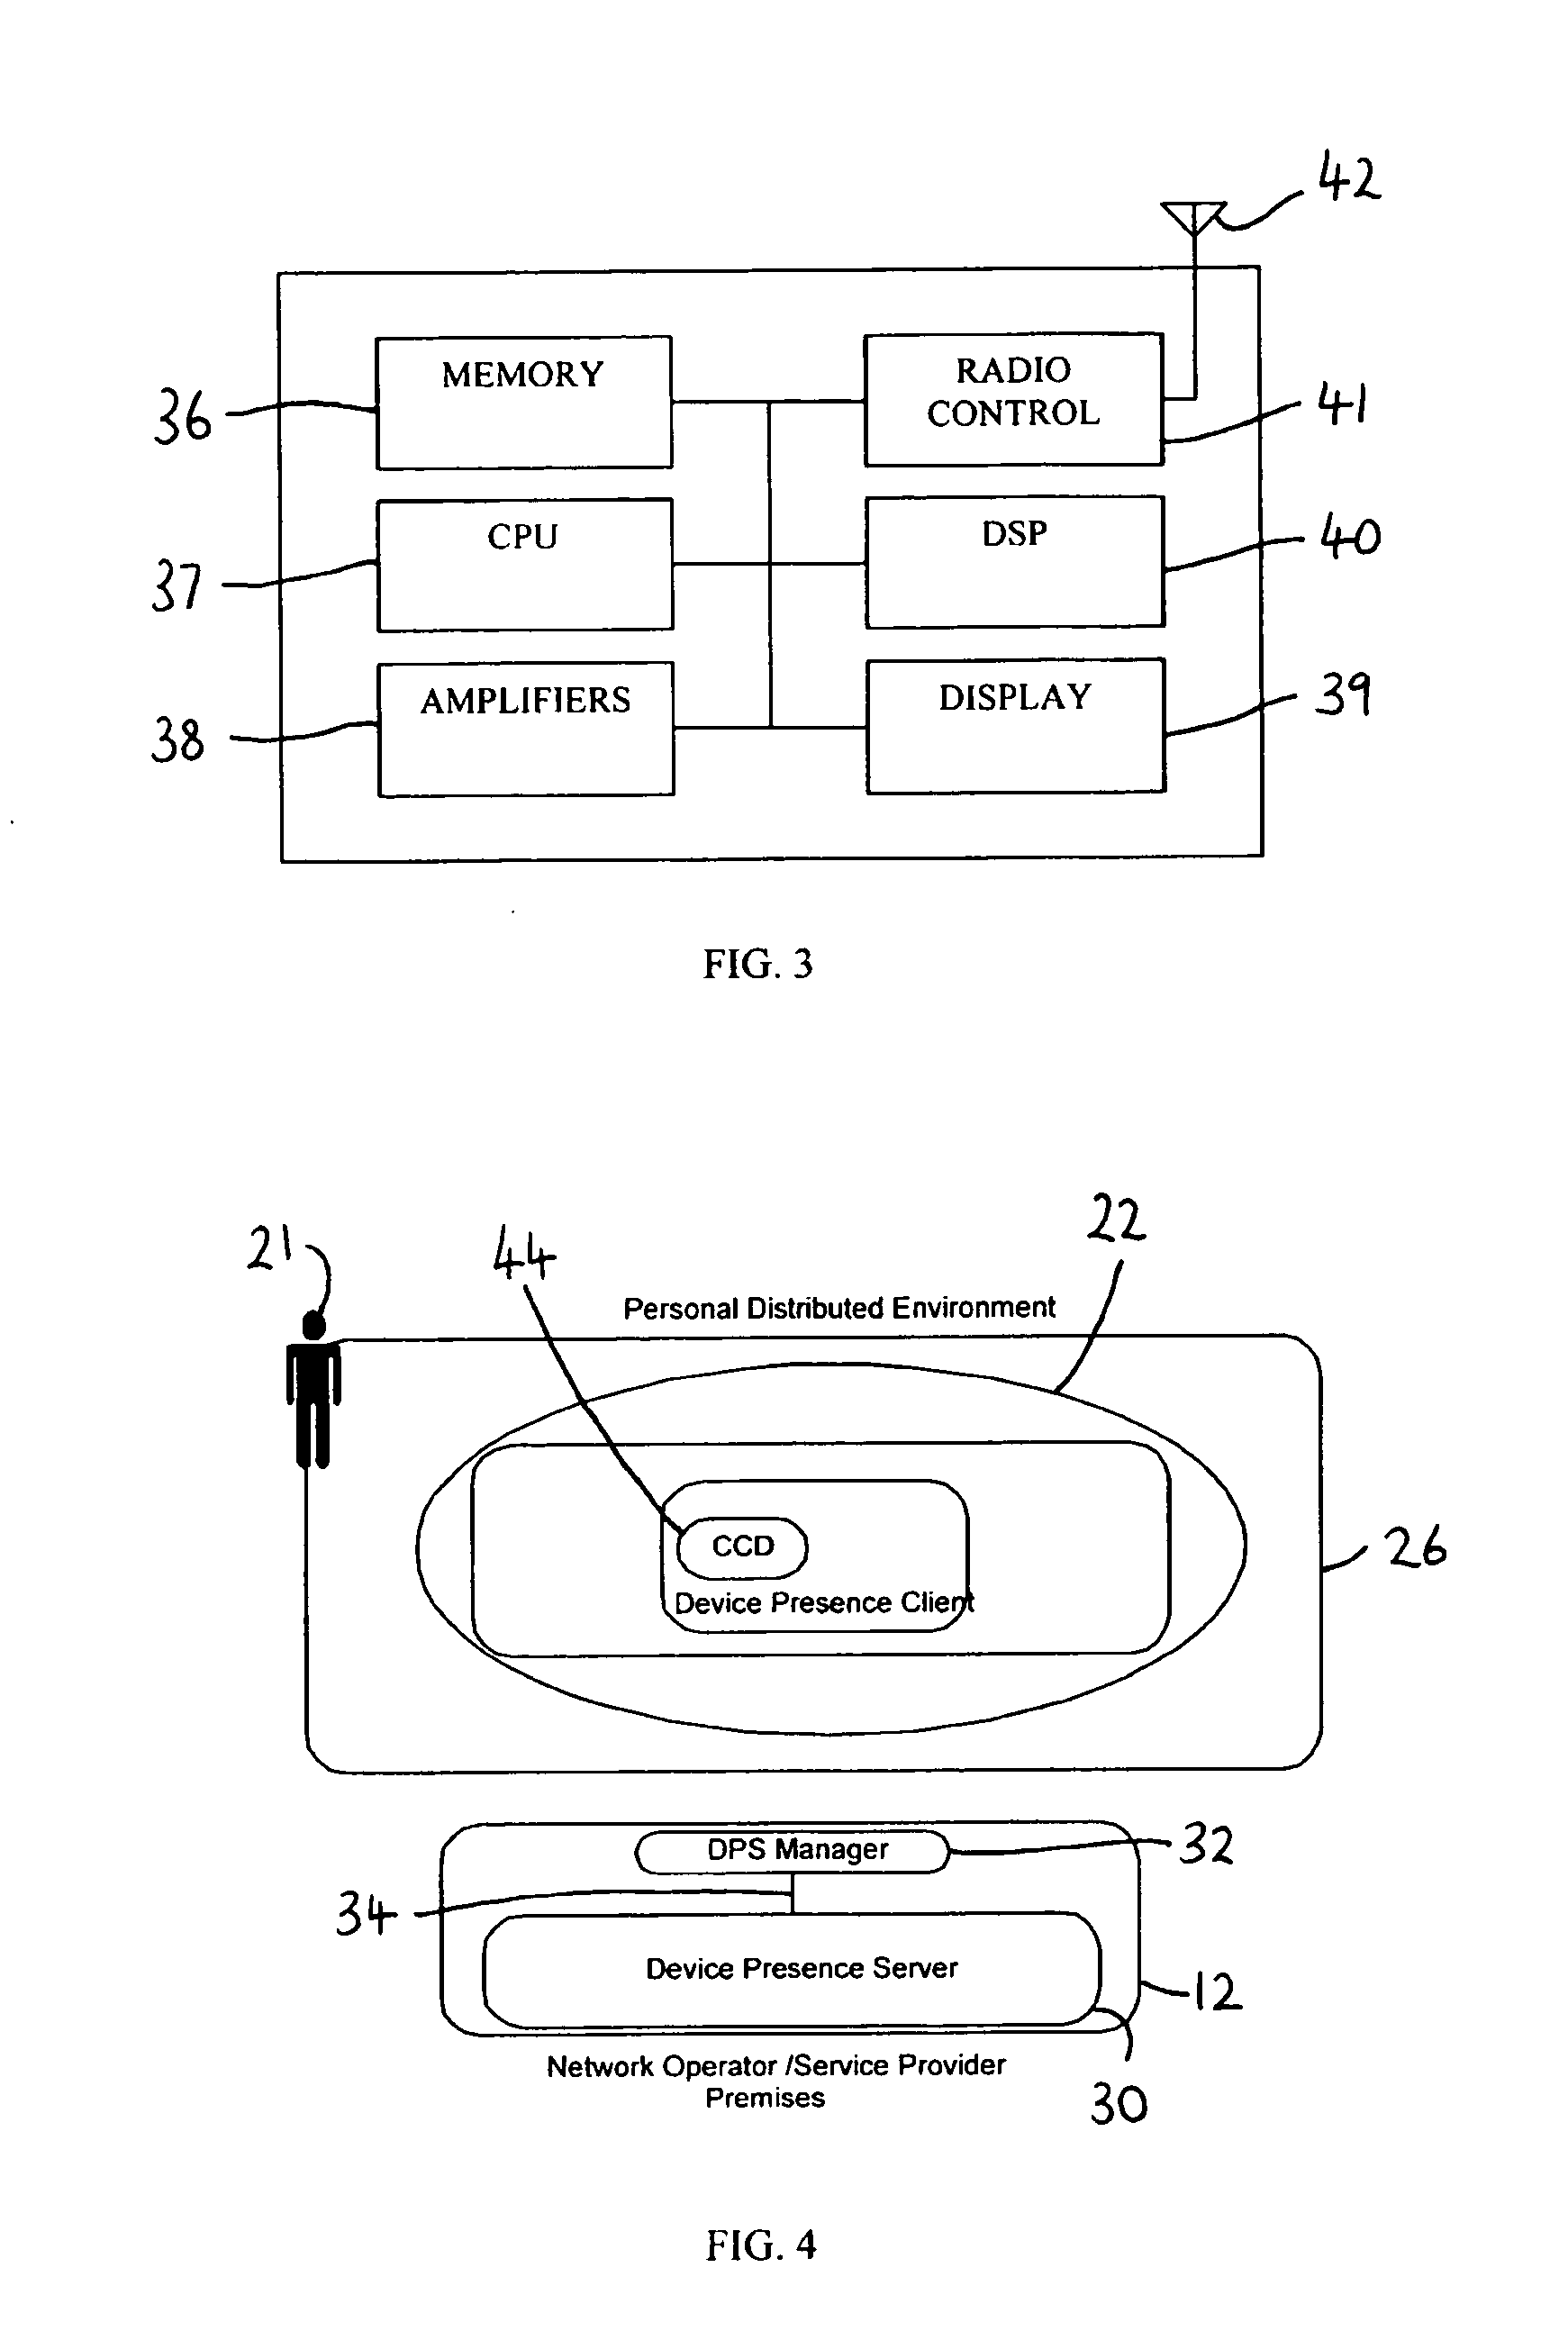 Method of discovering contact identifiers for network access devices